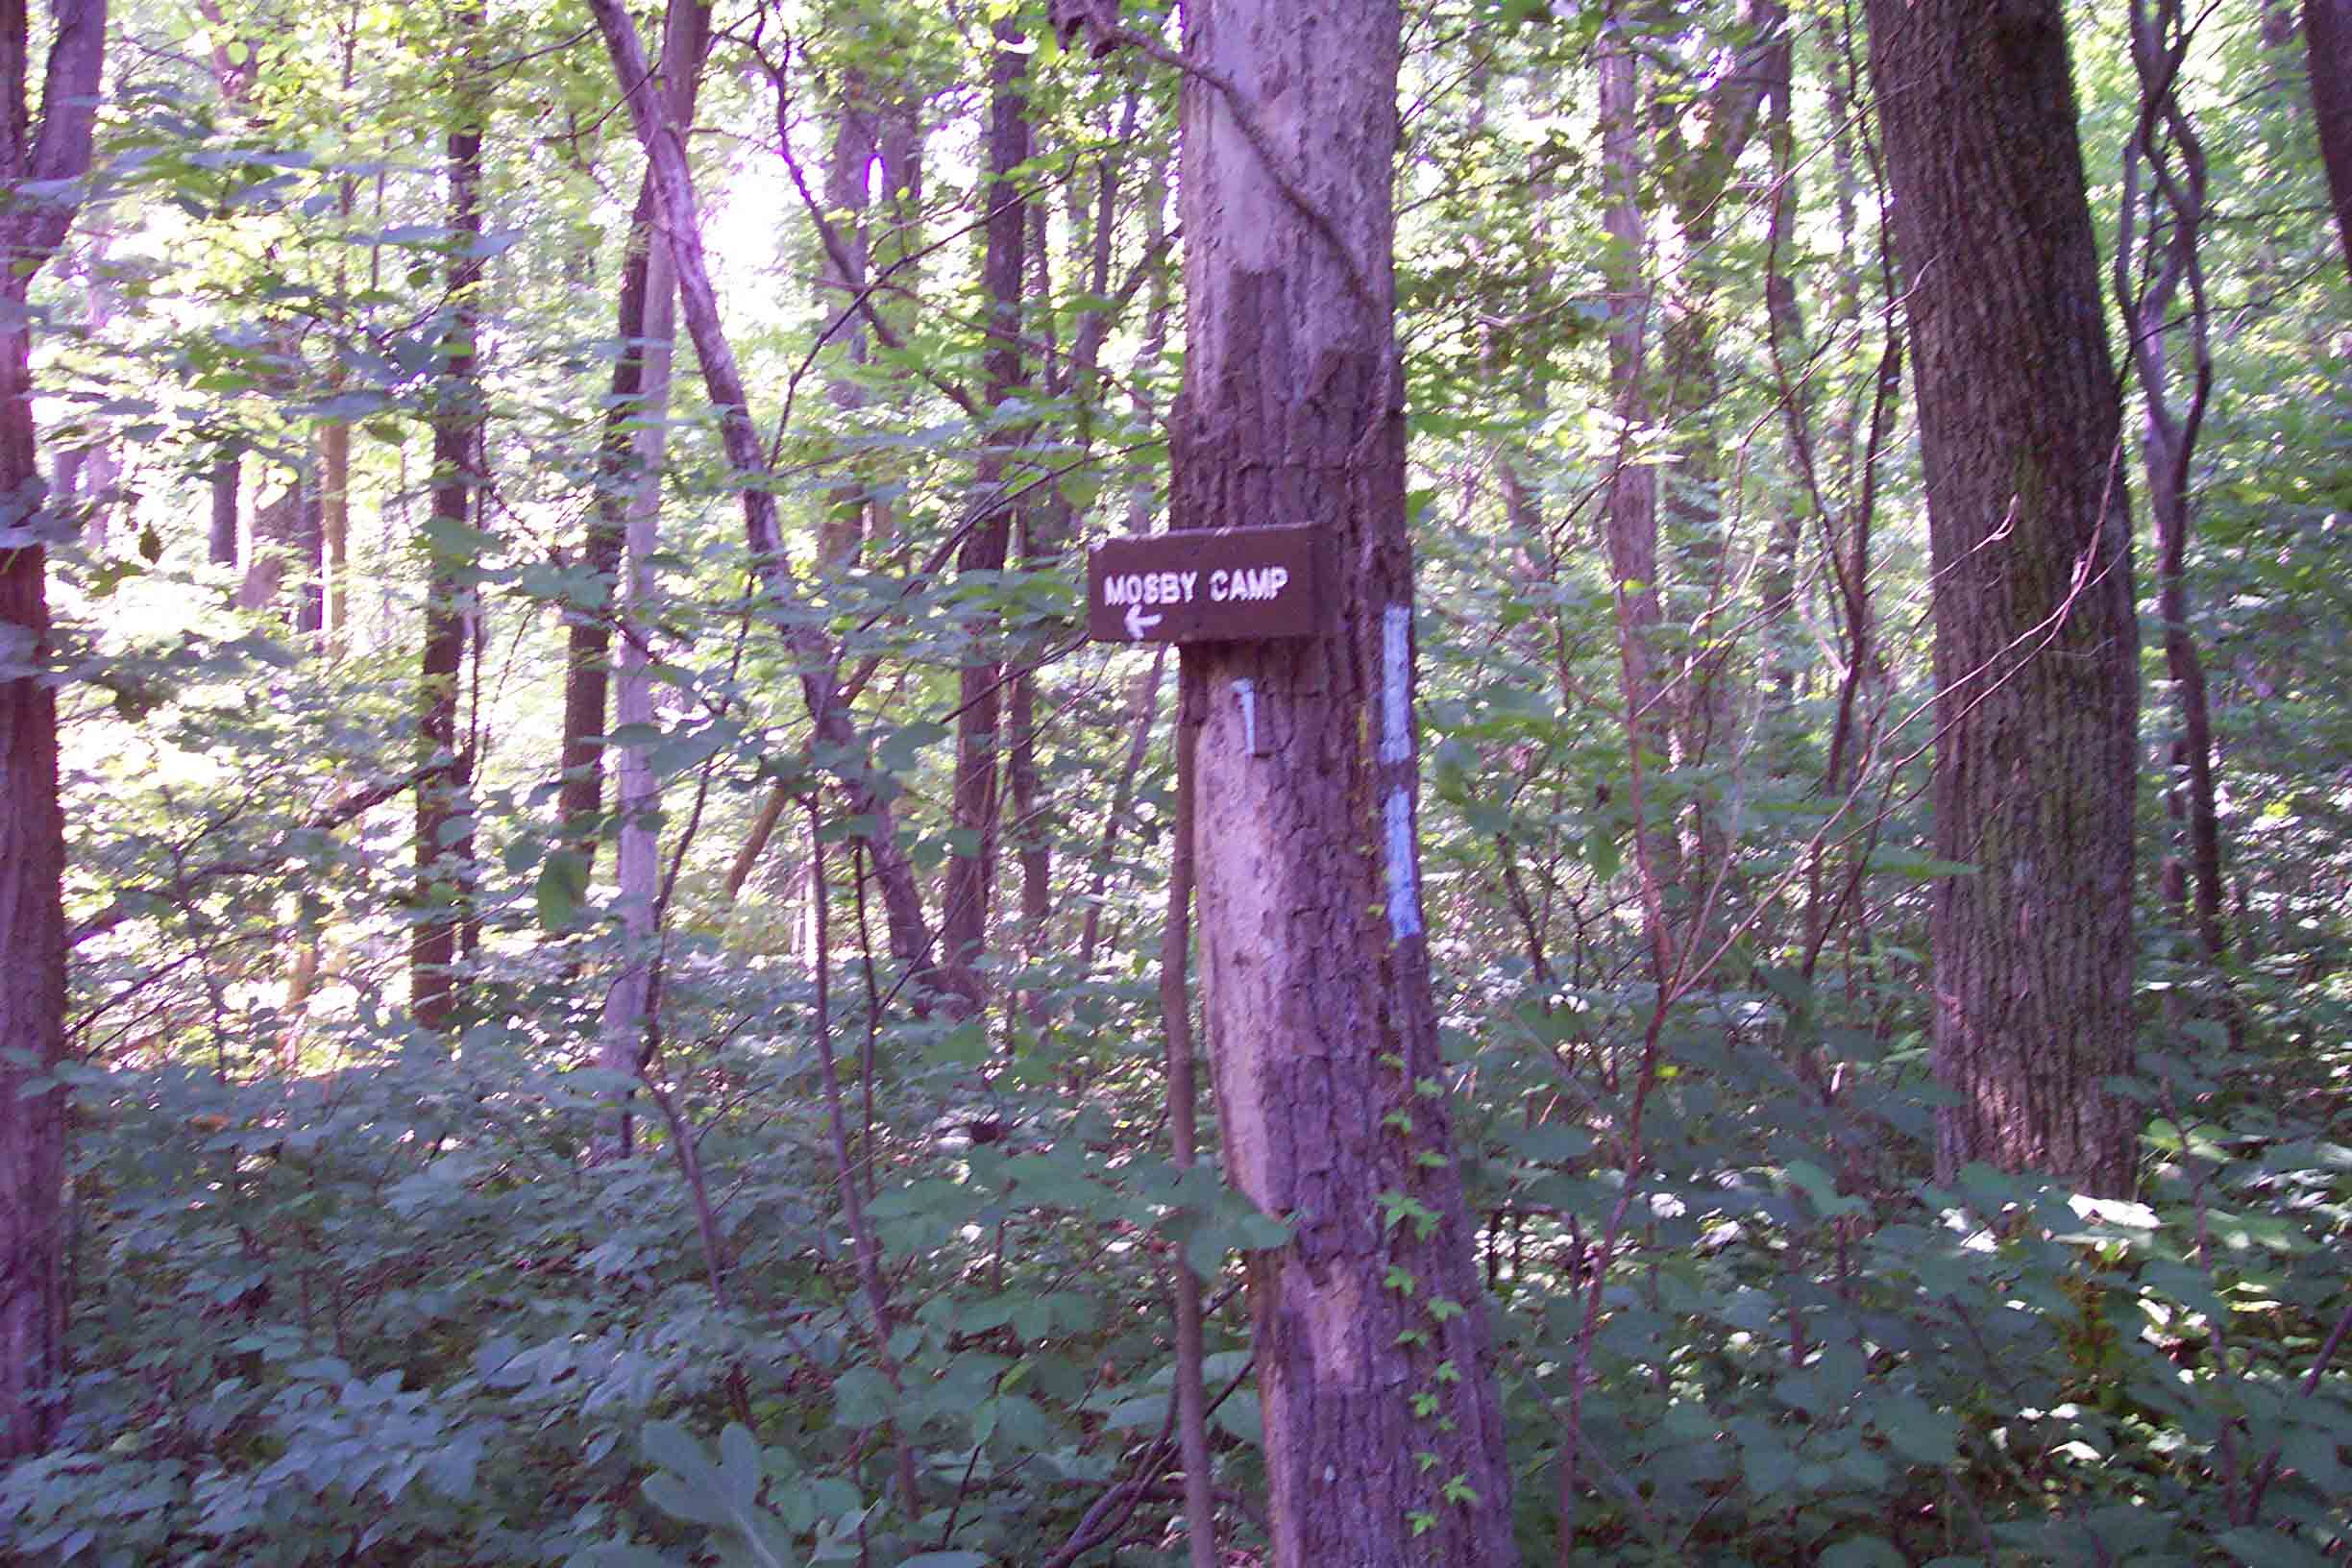 Sign leading to Mosby Campsite at Mile 4.9.  Courtesy ideanna656@aol.com